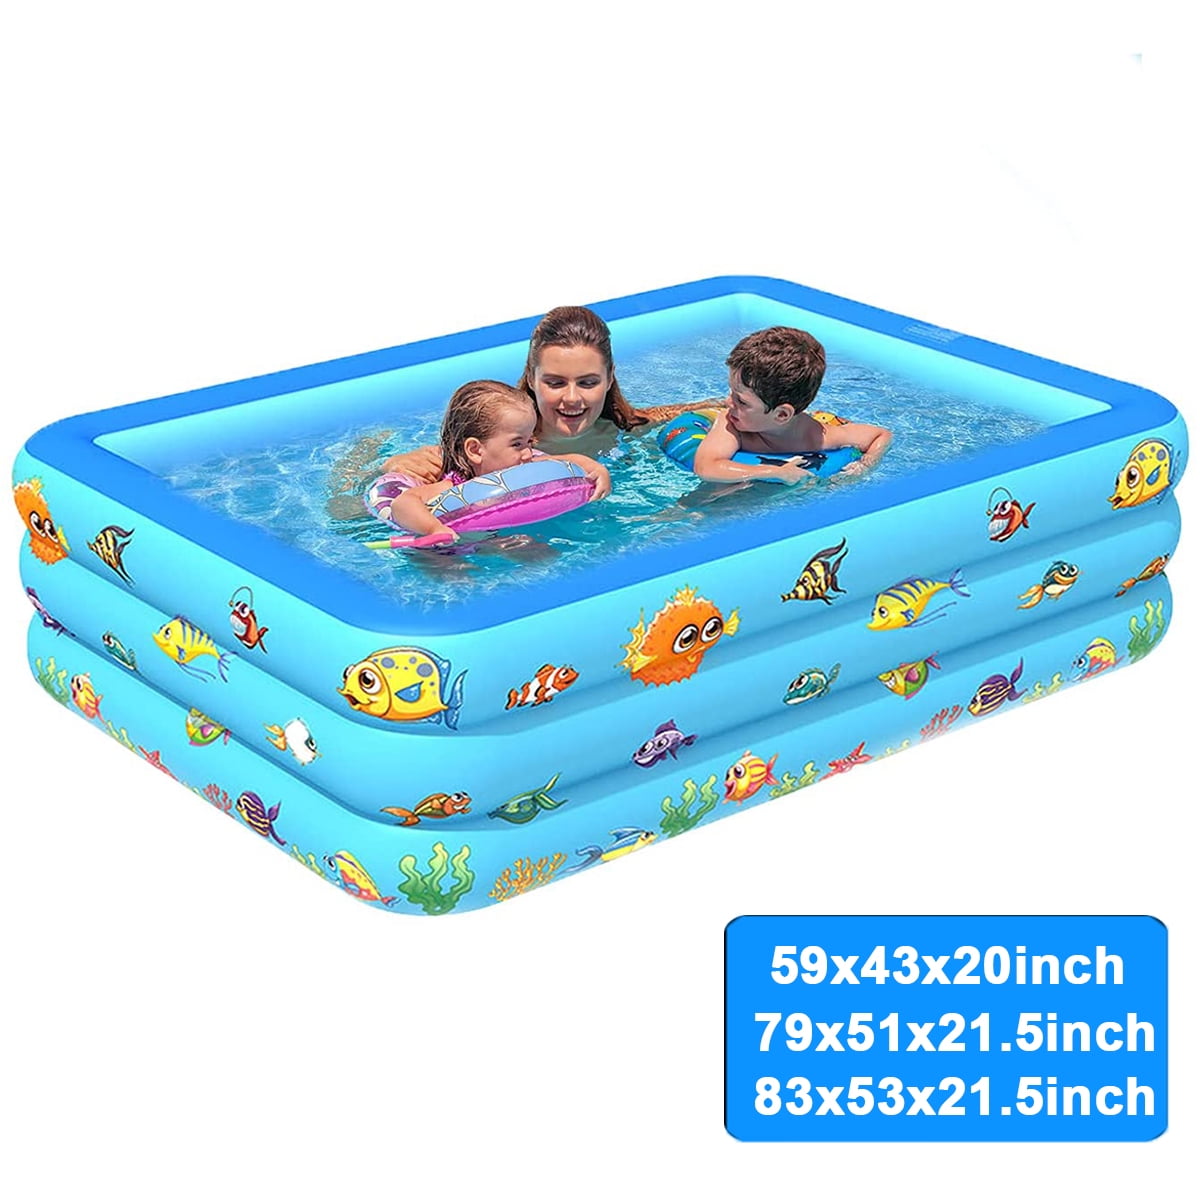 Details about   2021 Inflatable Children's Pool Outdoor Infant Adult Paddling Pool TOP 